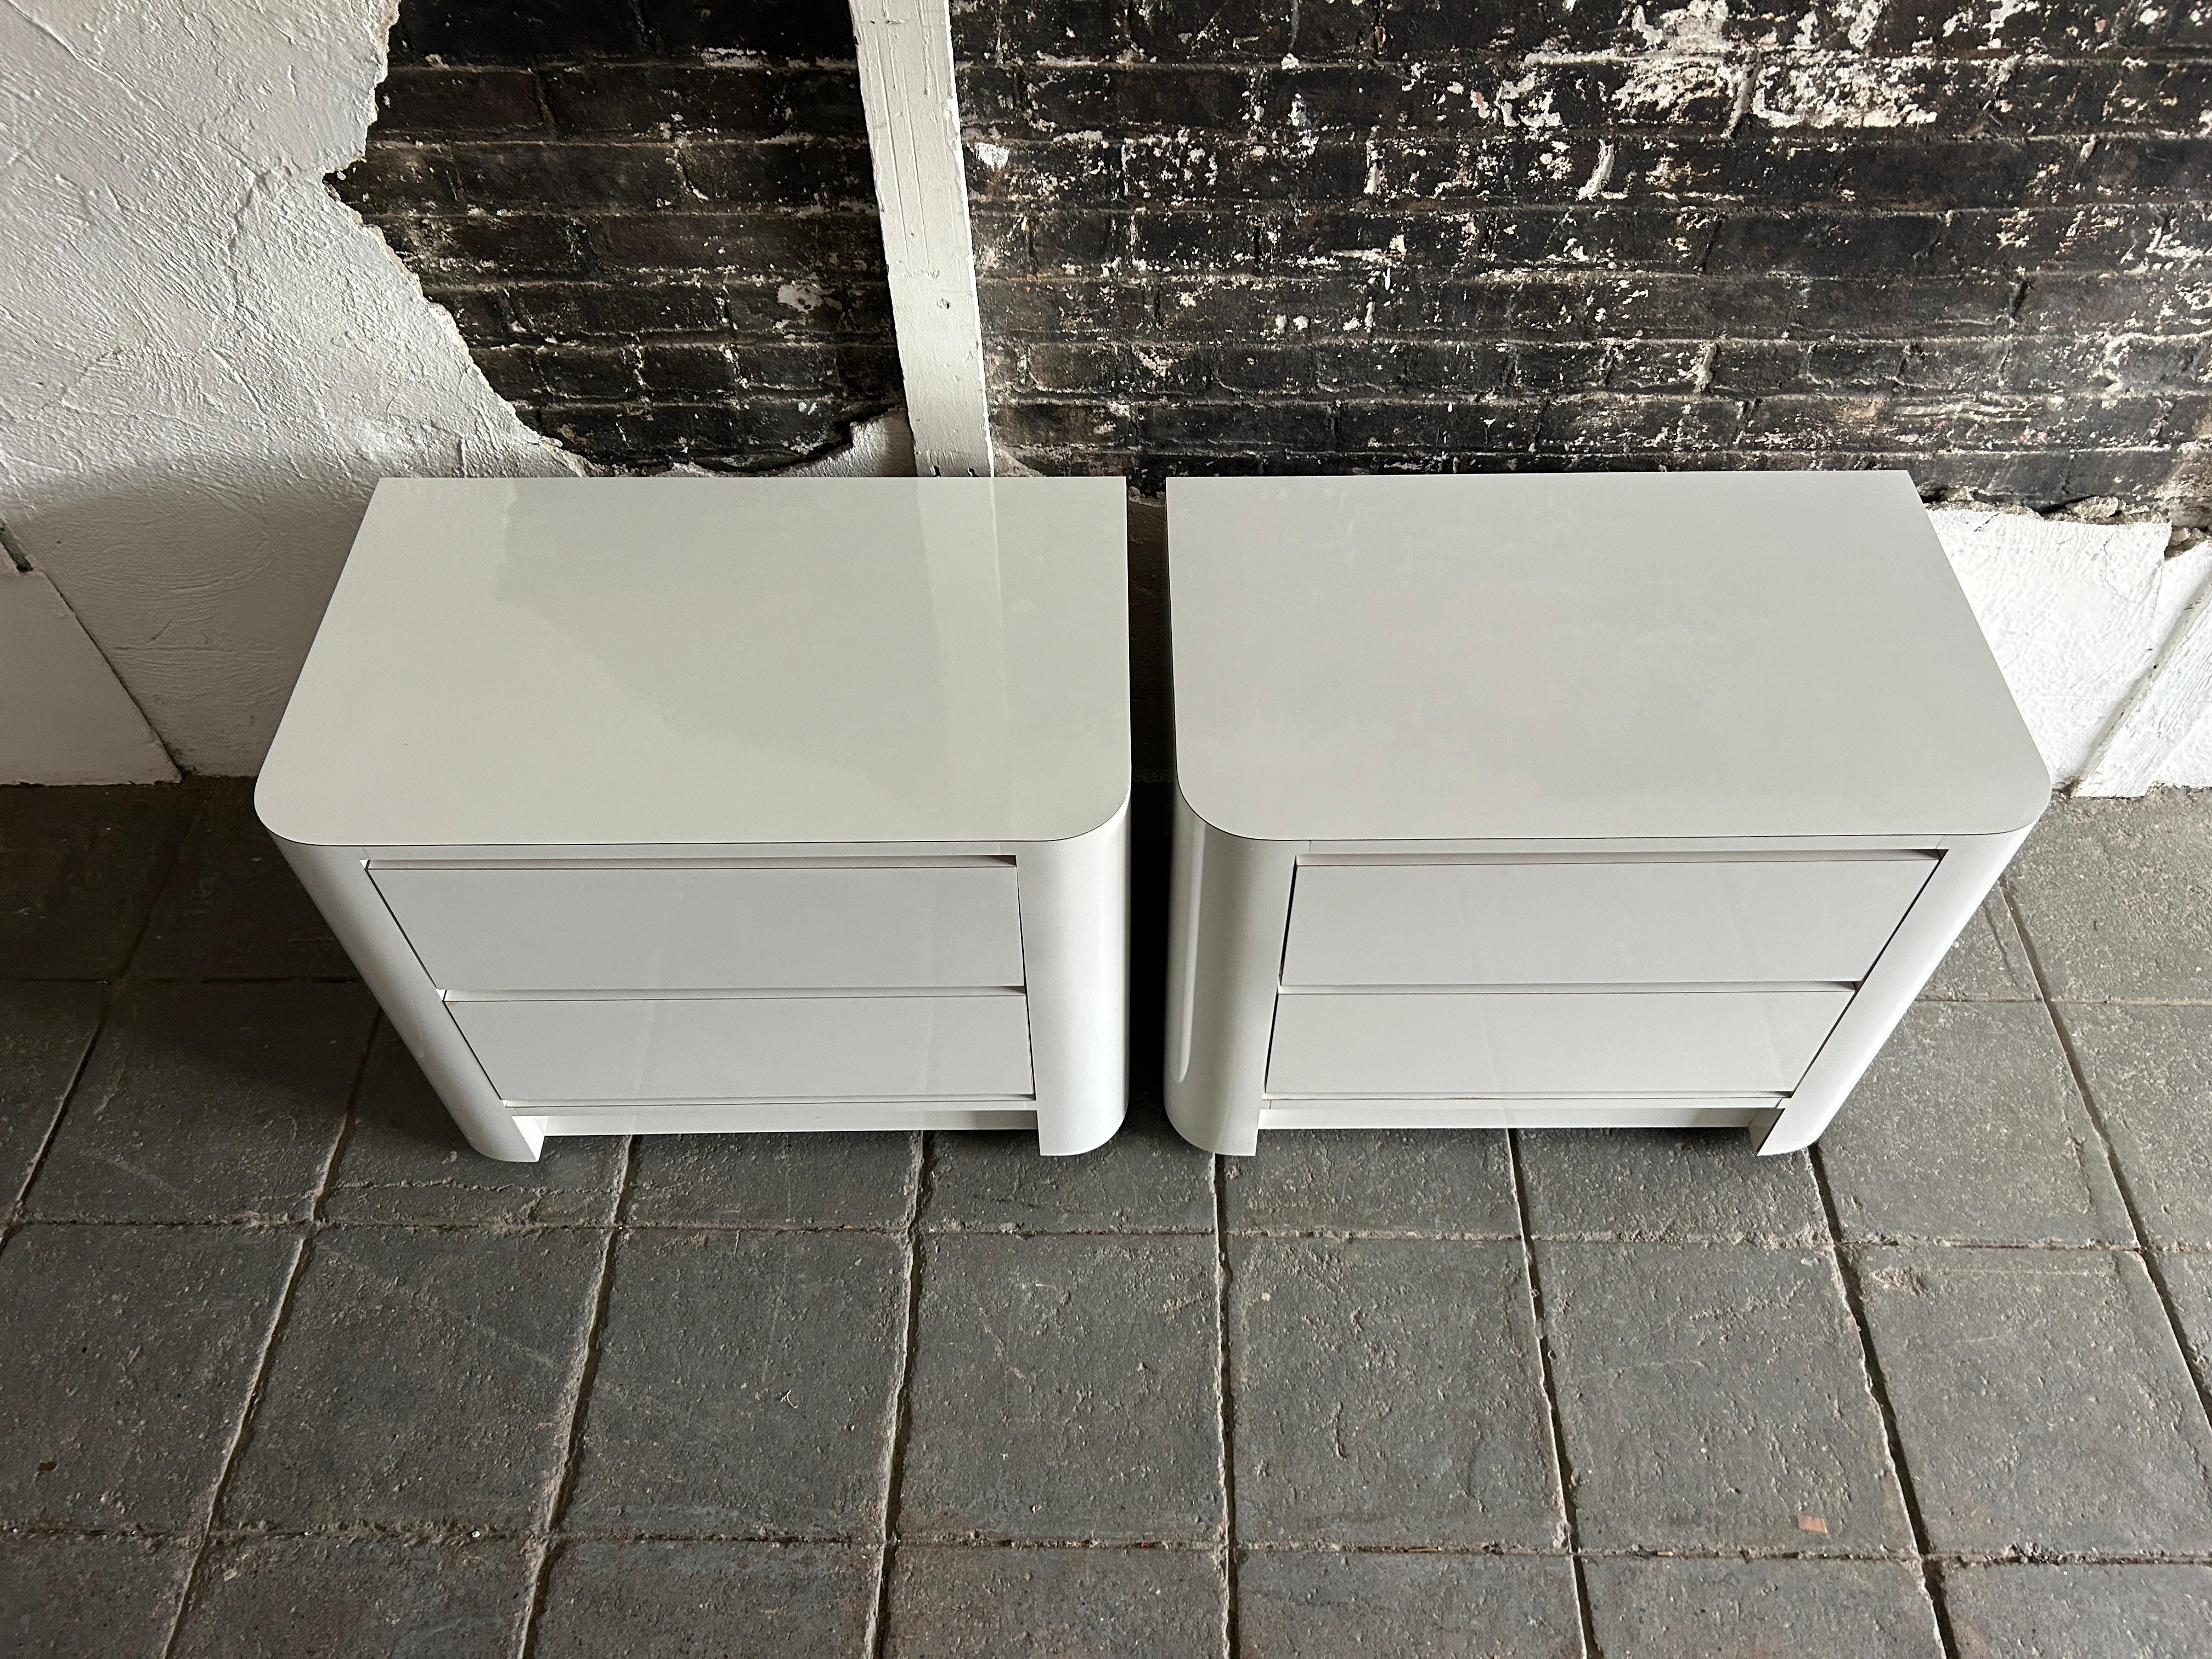 Pair of Mid Century custom made gloss white laminate and Nightstands 2 Drawers. Beautiful condition inside and out. Circa 1970 - 3 Drawer Nightstands all drawers have metal glides all smooth. Shows very little use. Post Modern. Located In Brooklyn